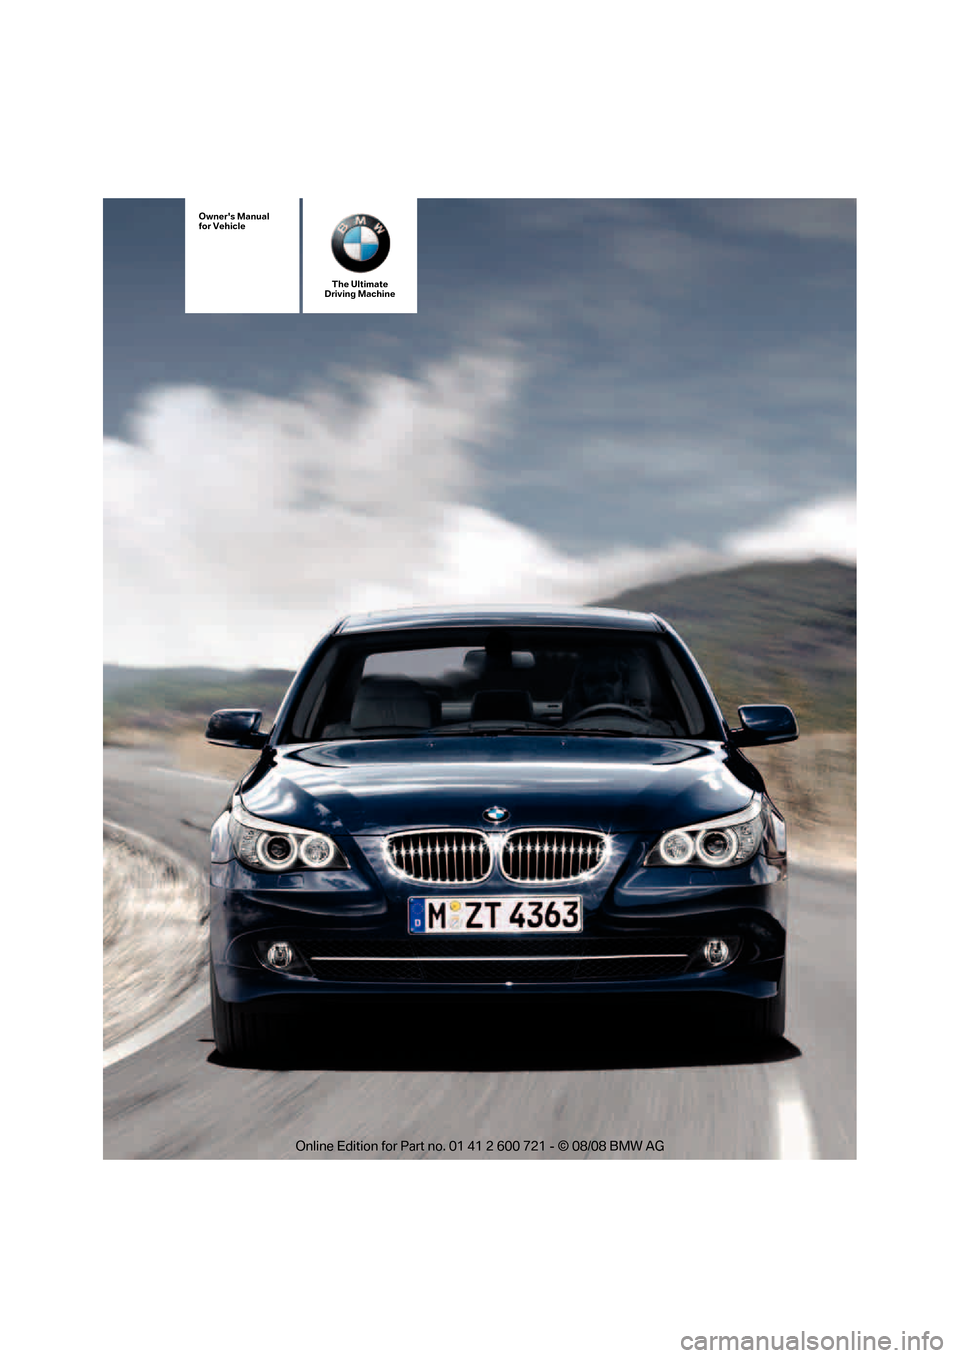 BMW 528I SEDAN 2009 E60 Owners Manual The Ultimate
Driving Machine
Owners Manual
for Vehicle 